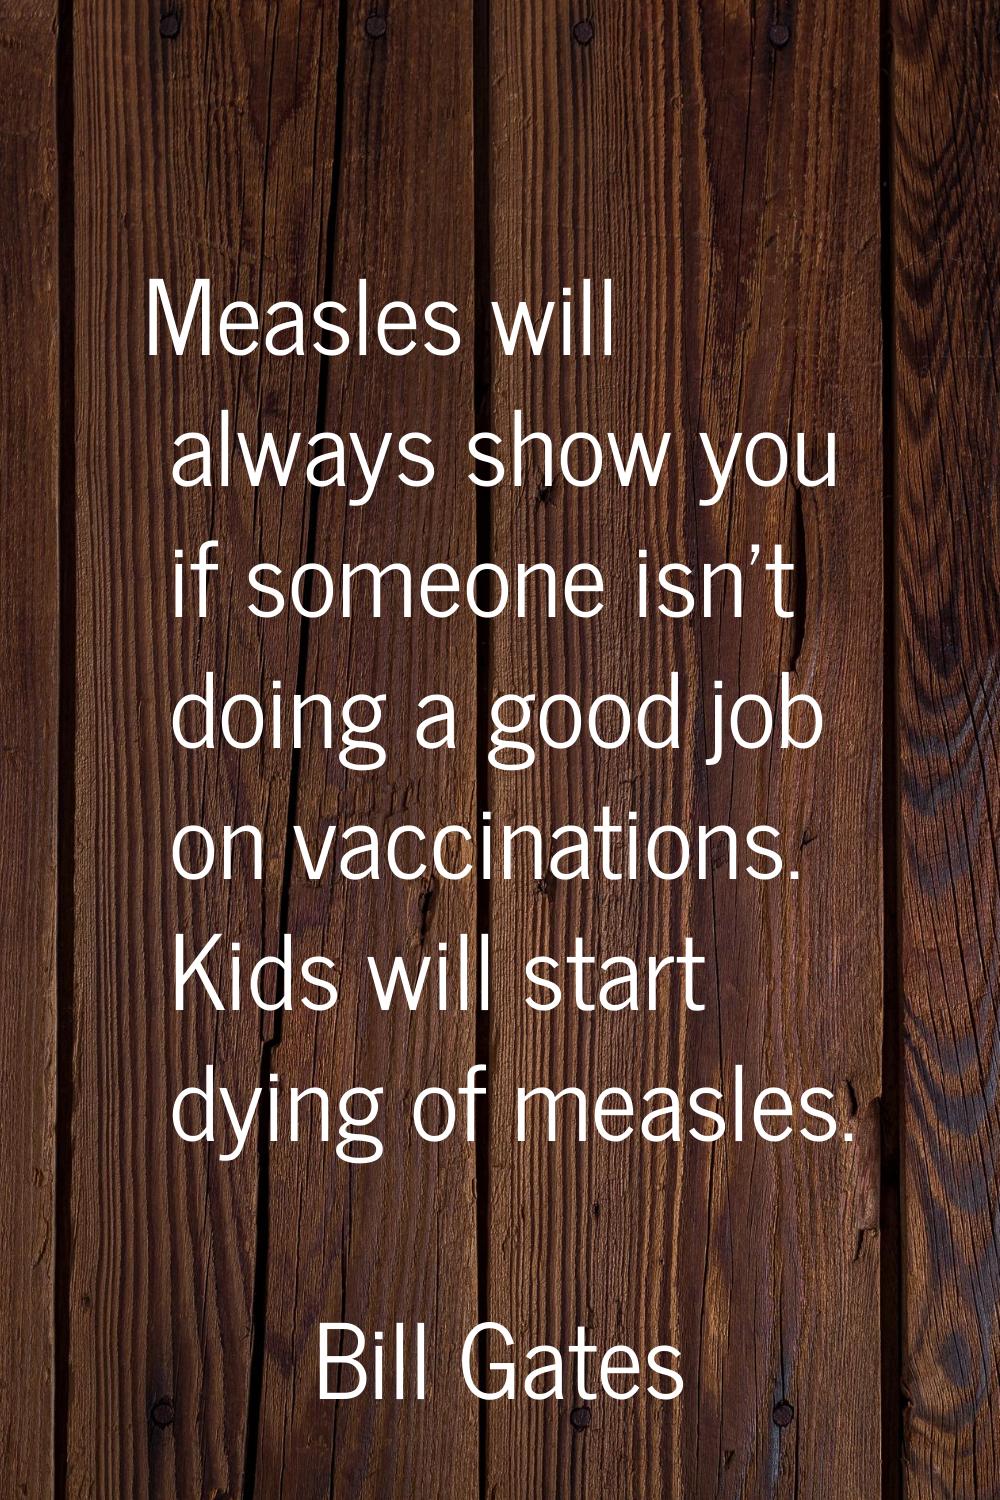 Measles will always show you if someone isn't doing a good job on vaccinations. Kids will start dyi